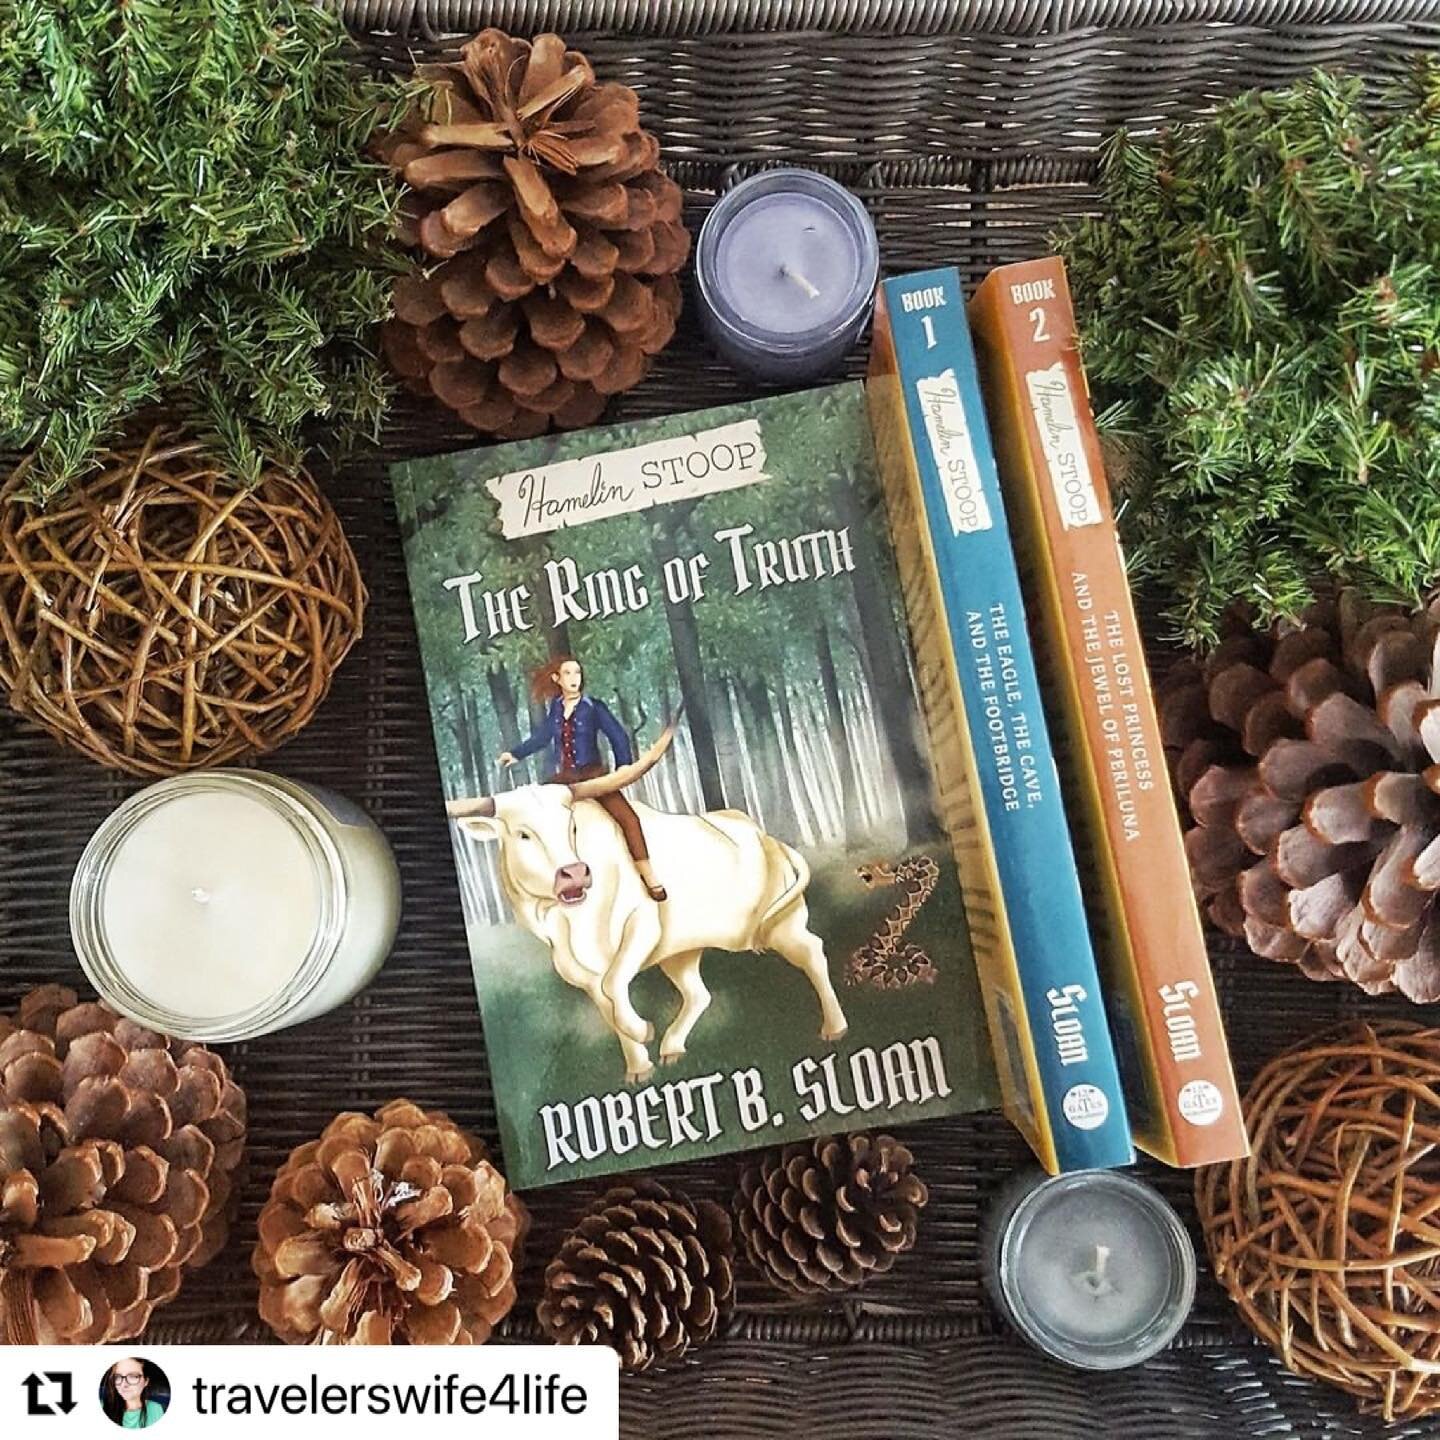 Don&rsquo;t miss the giveaway this week! [Enter on the original post]

#Repost @travelerswife4life with @make_repost
・・・
🤏📚This or that: Outright Princess or Secret Princess? 

I Really enjoy books that have a secret princess, long lost or of the c